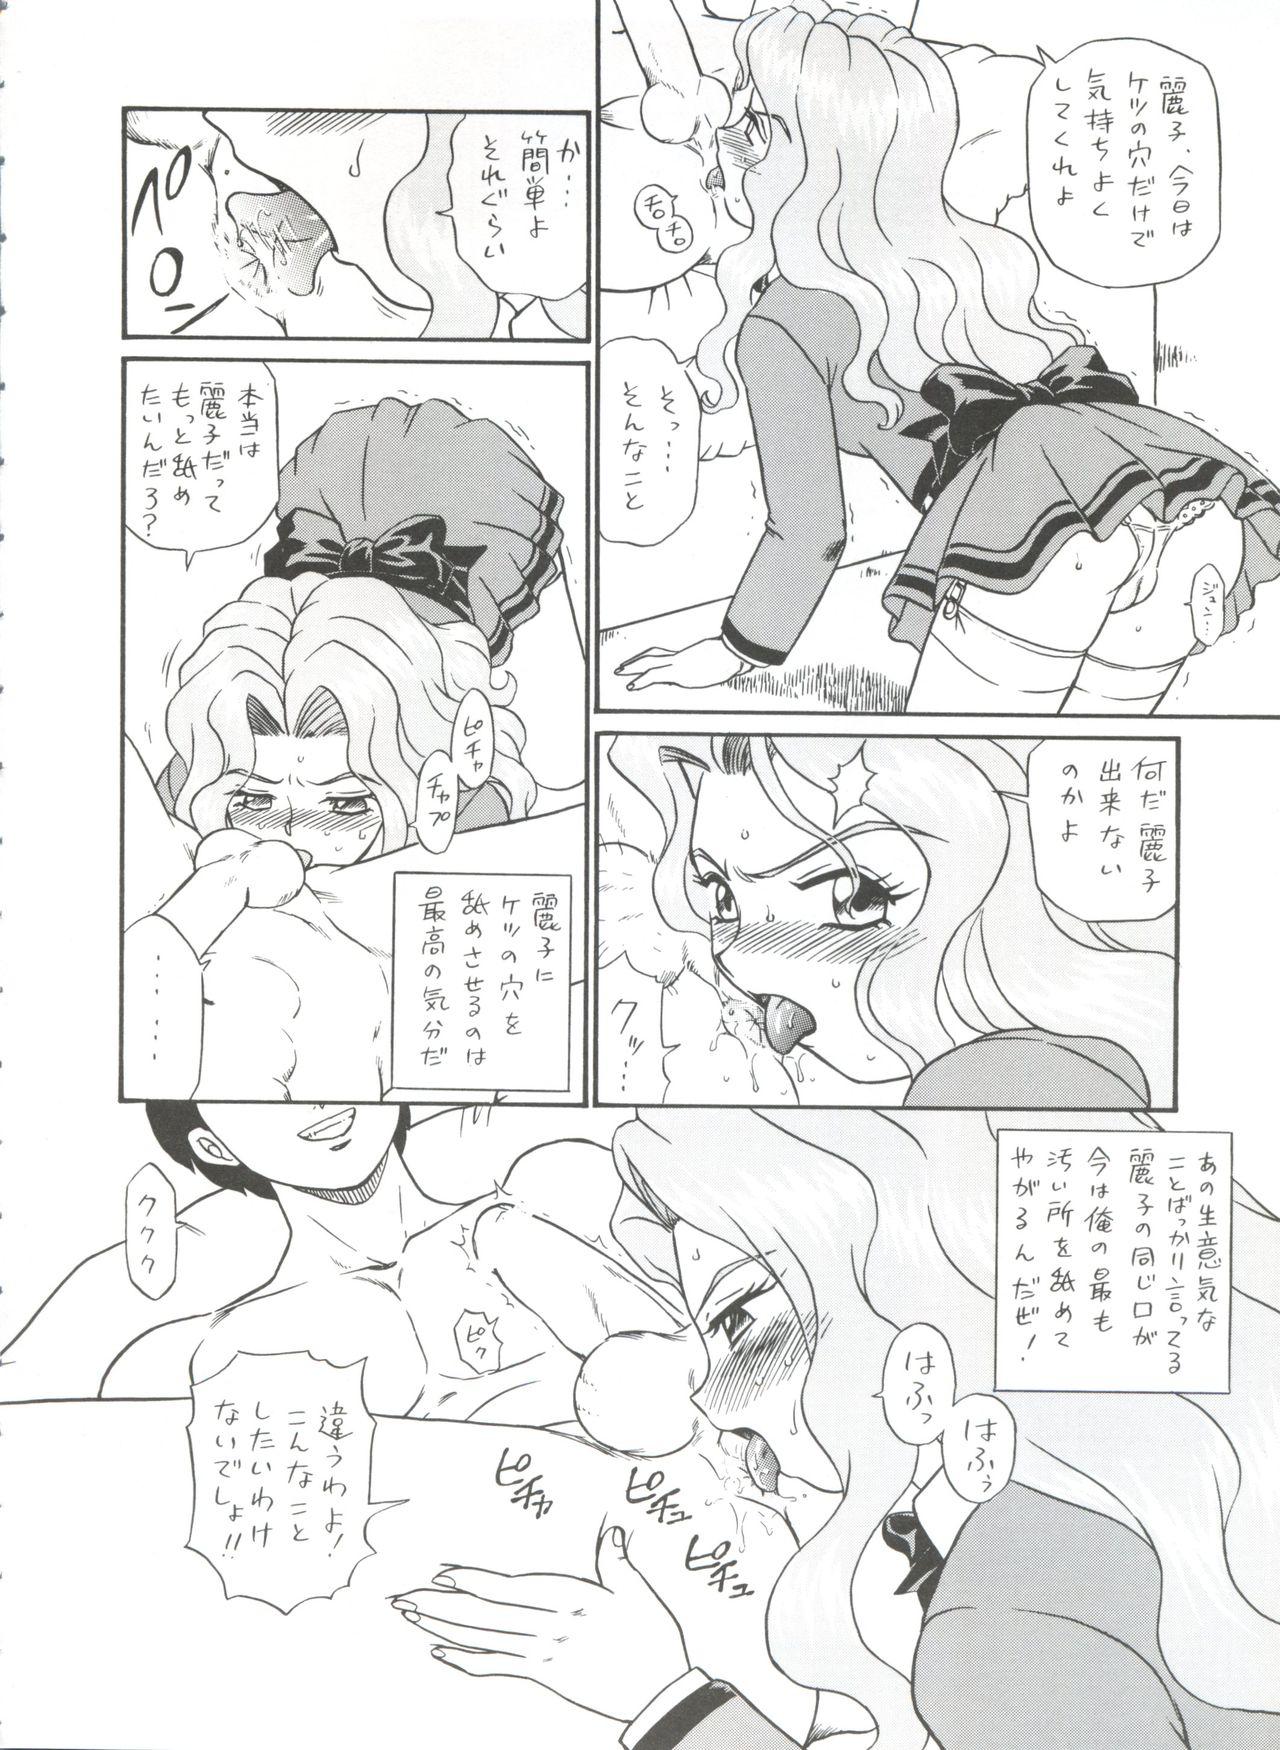 College Shippoppo Club House - Ghost sweeper mikami Kakyuusei Aim for the ace Jaja uma grooming up Picked Up - Page 6